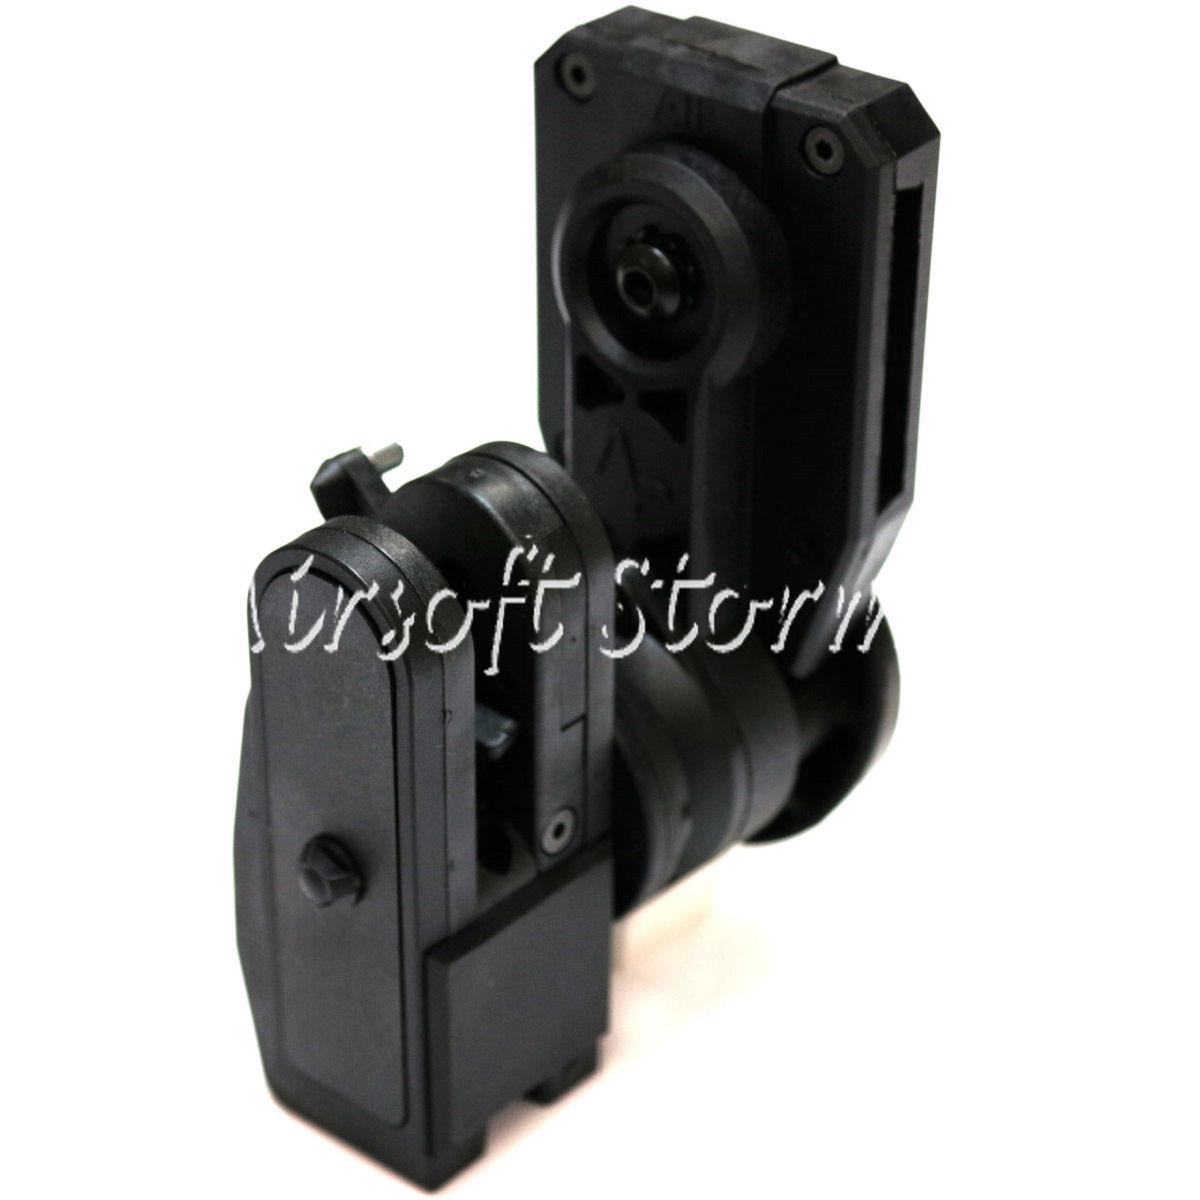 AIP Multi-Angle IPSC Speed Holster for Hi-Capa/Glock/1911